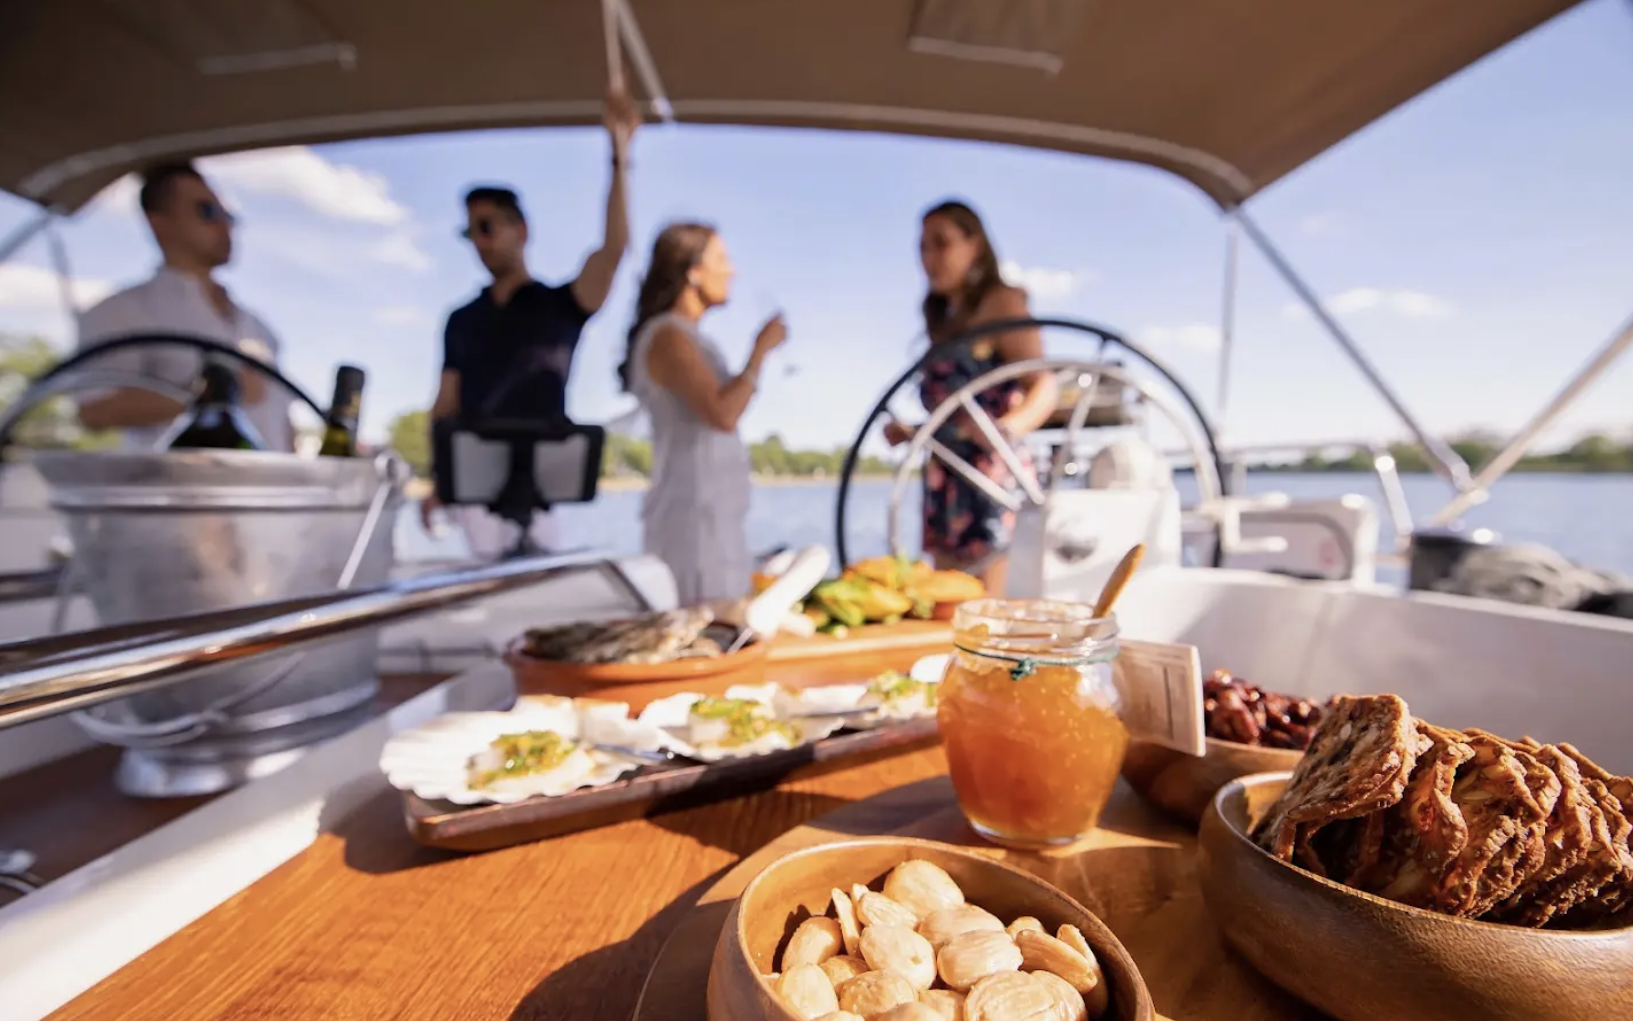 Appetizers on a boat with four people in the background